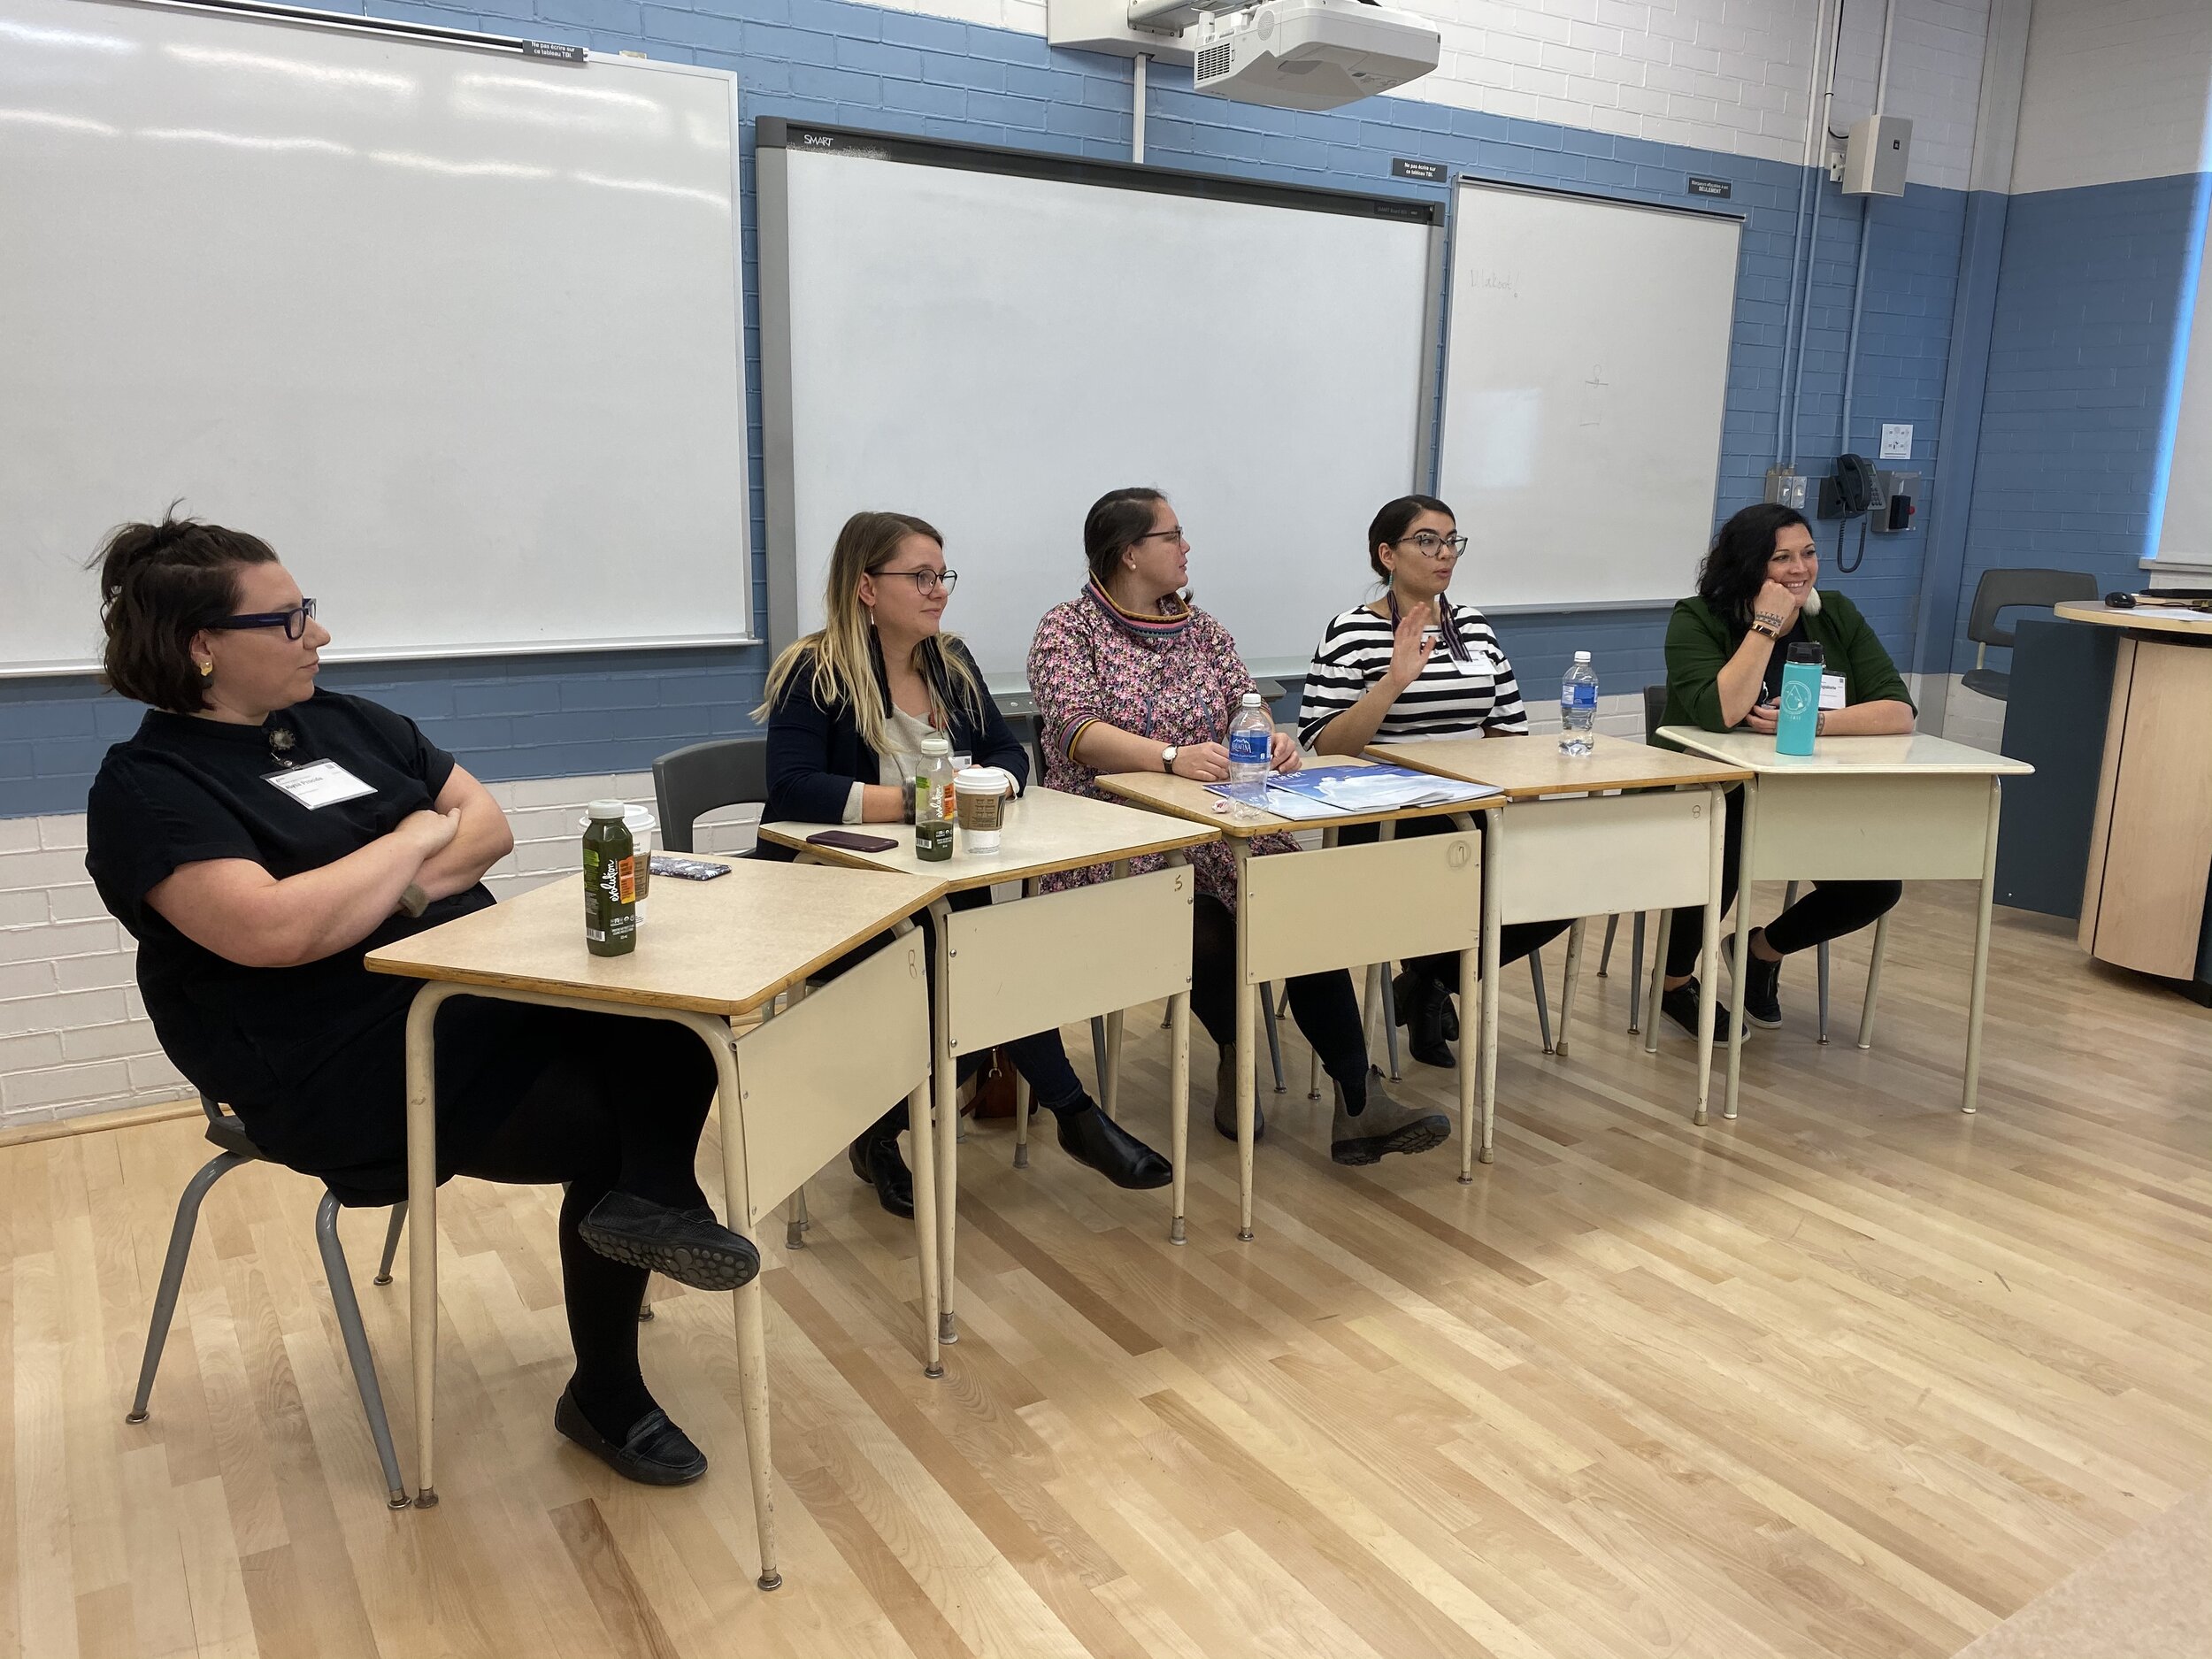  Alysa Procida, Britt Gallpen, Napatsi Folger, Emily Henderson, and Heather Igloliorte on the “Supporting Inuit Leadership in the Arts at the Inuit Art Foundation” panel at the 21st Inuit Studies Conference, UQAM, Montreal QC. October 2019. 